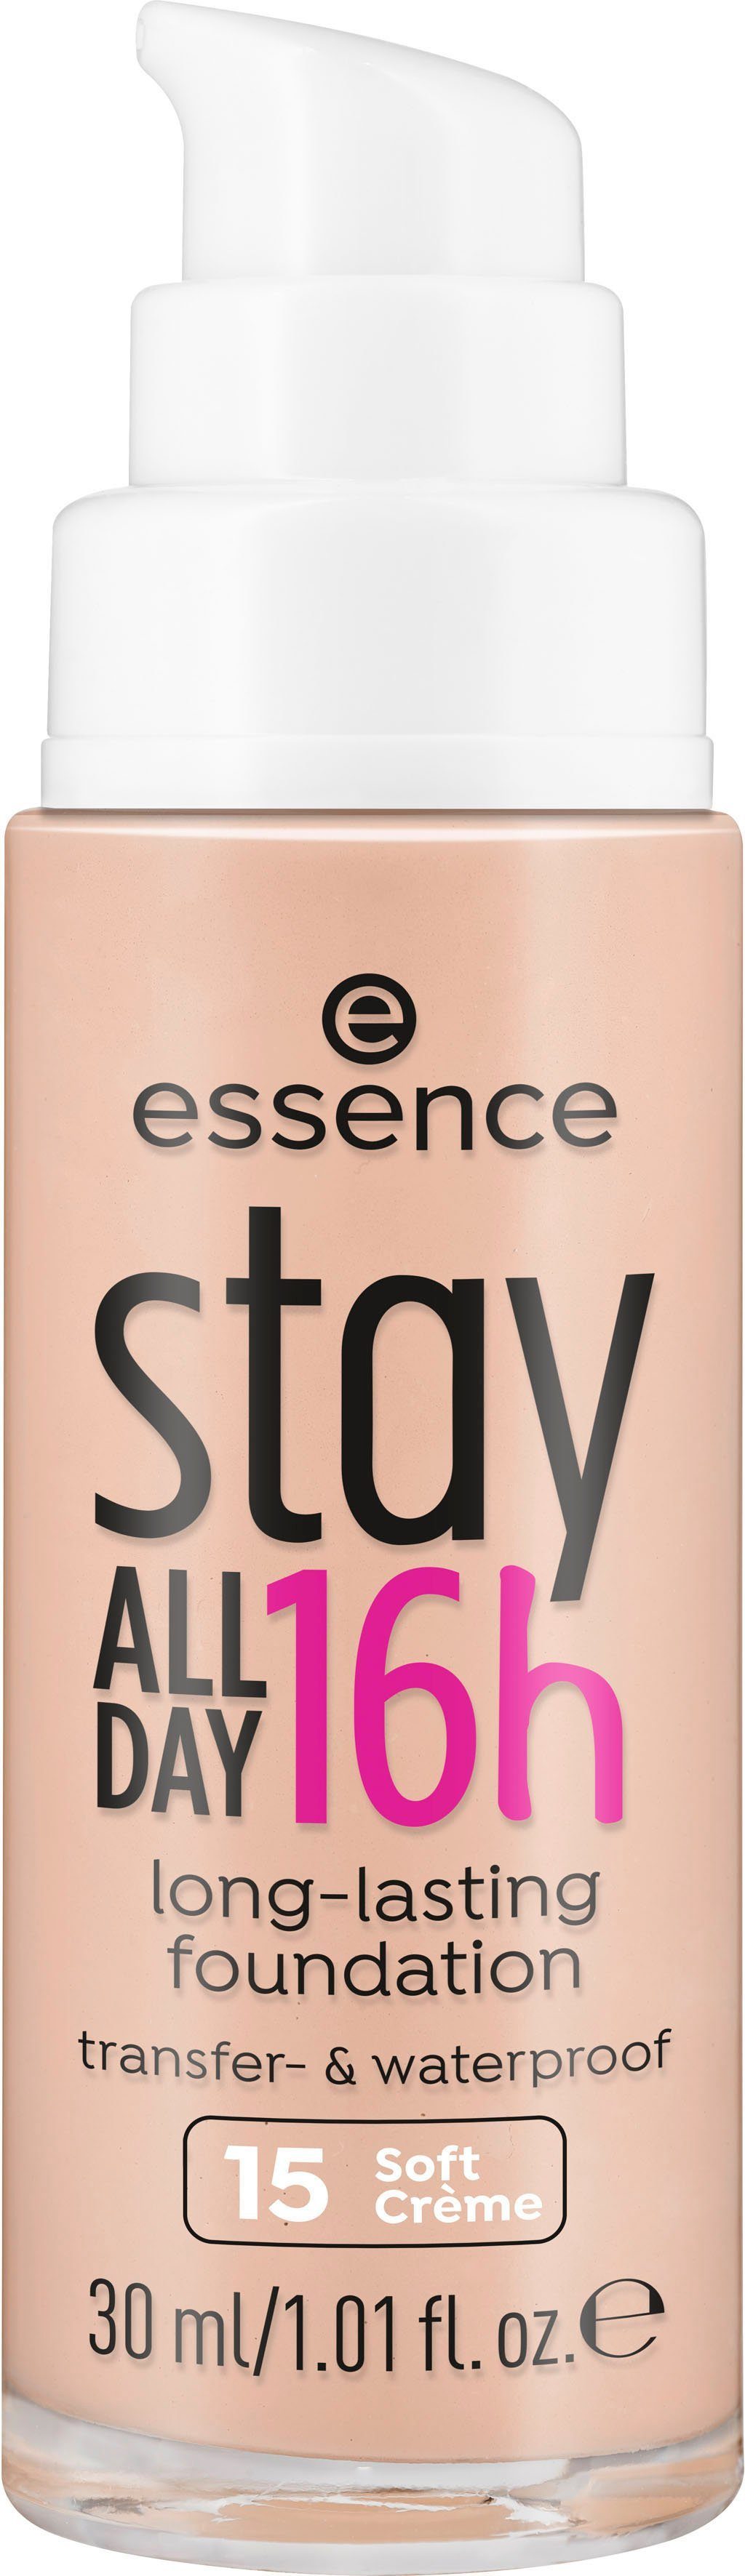 ALL DAY Soft 3-tlg. 16h Creme Foundation Essence stay long-lasting,